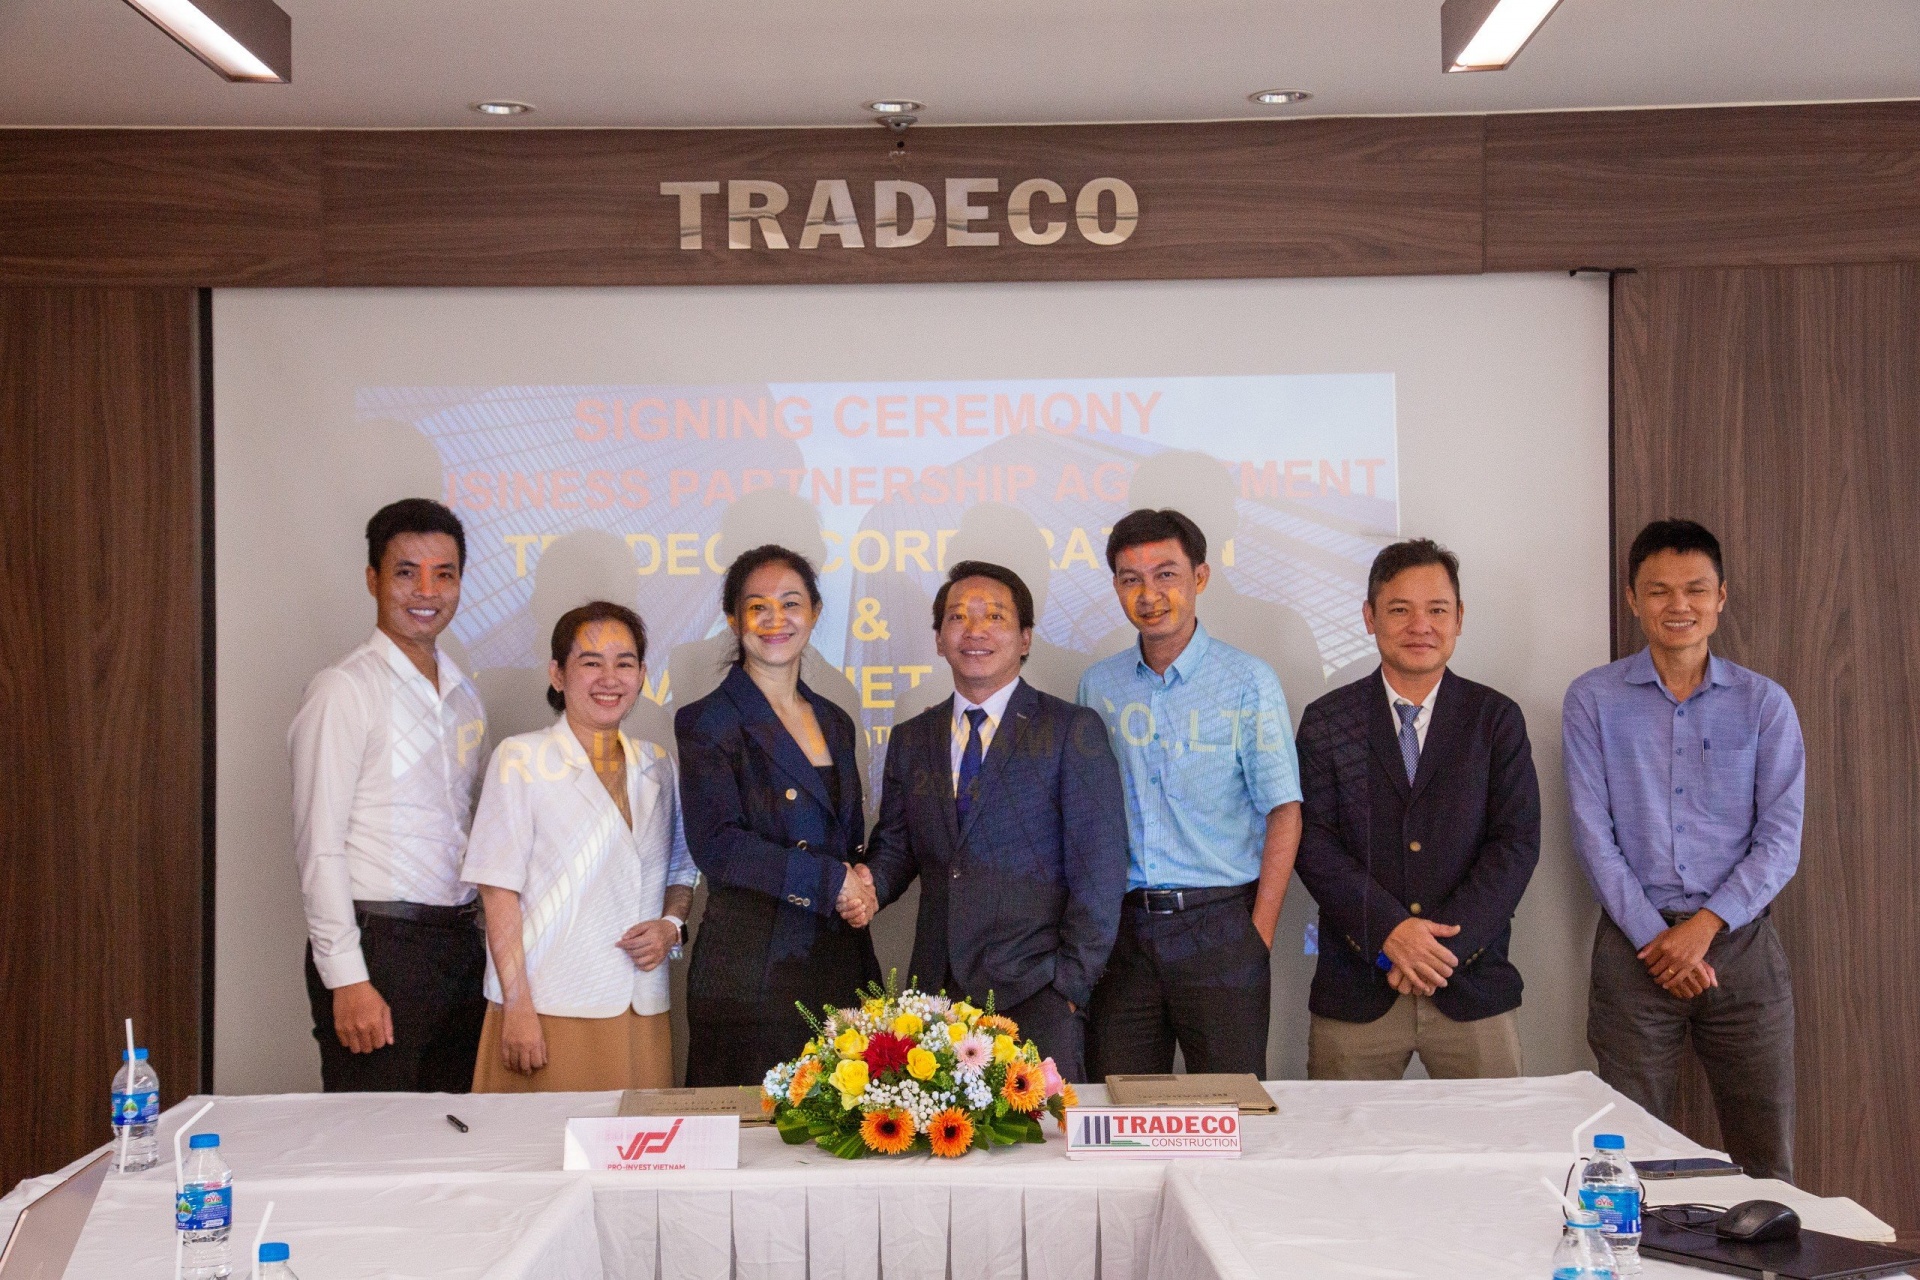 Pro-Invest Vietnam a trusted partner in industrial real estate supply chain services